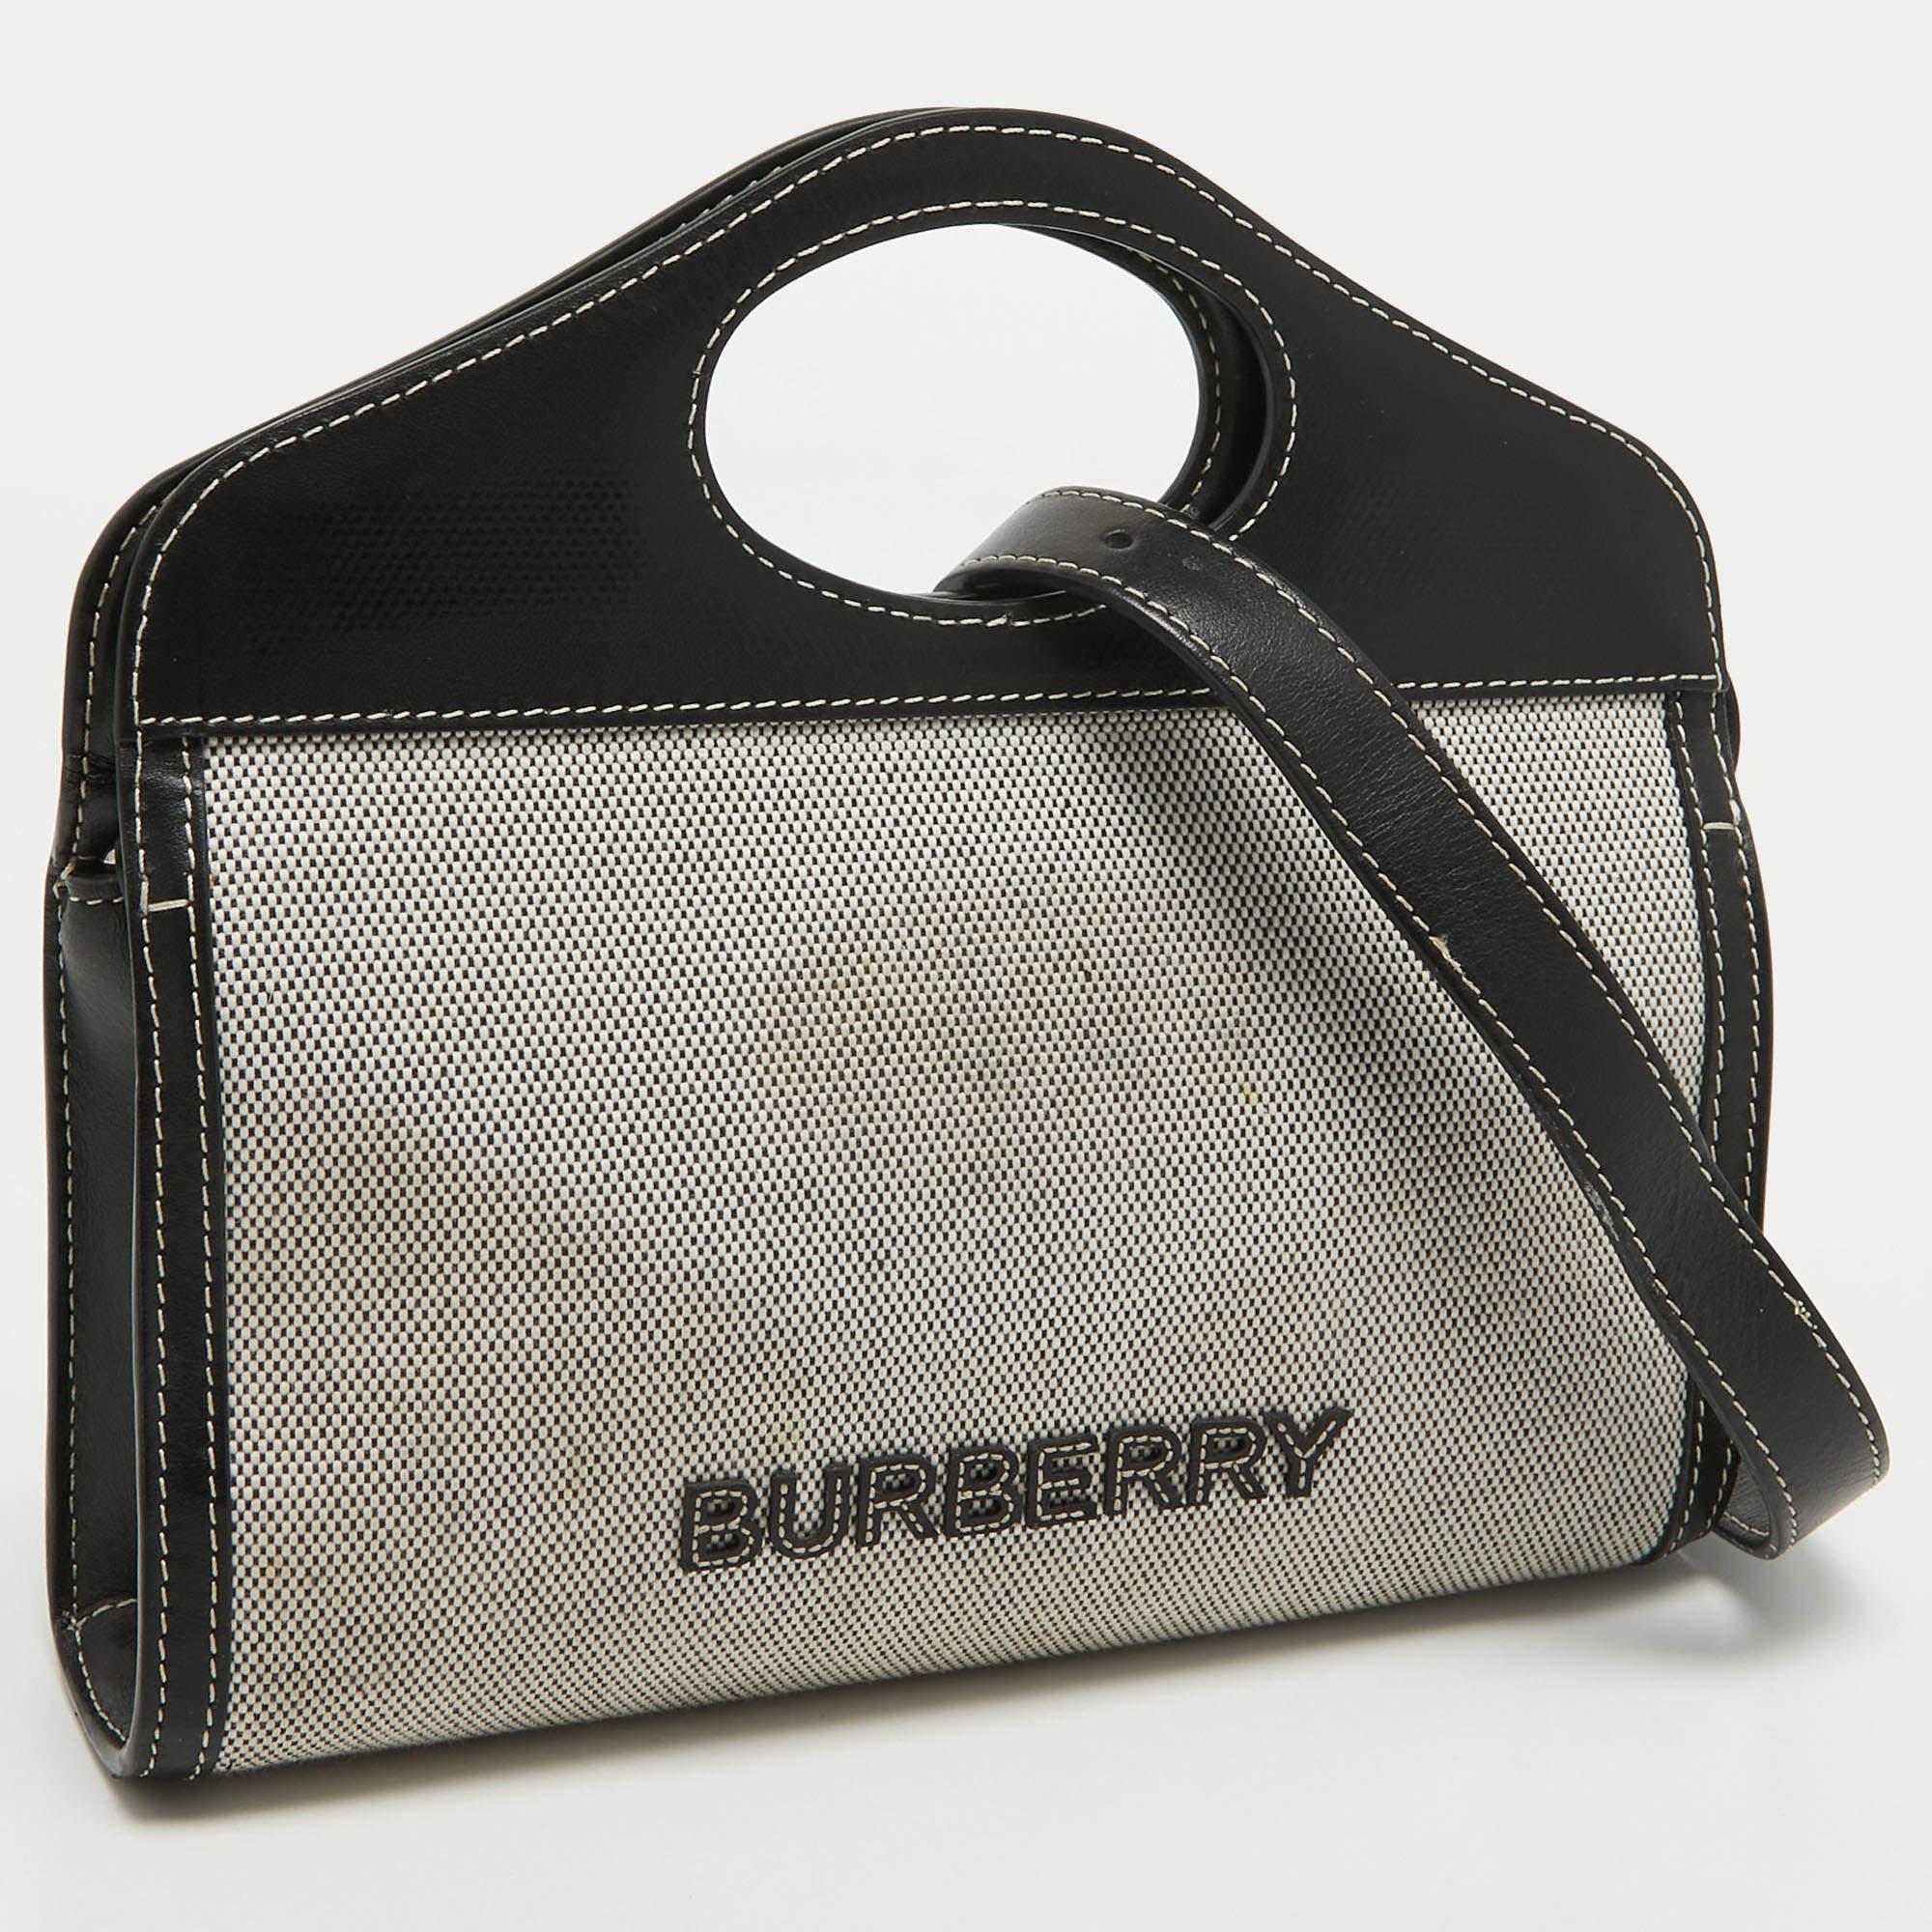 Burberry Black/Grey Canvas and Leather Pocket Portable Crossbody Bag For Sale 4